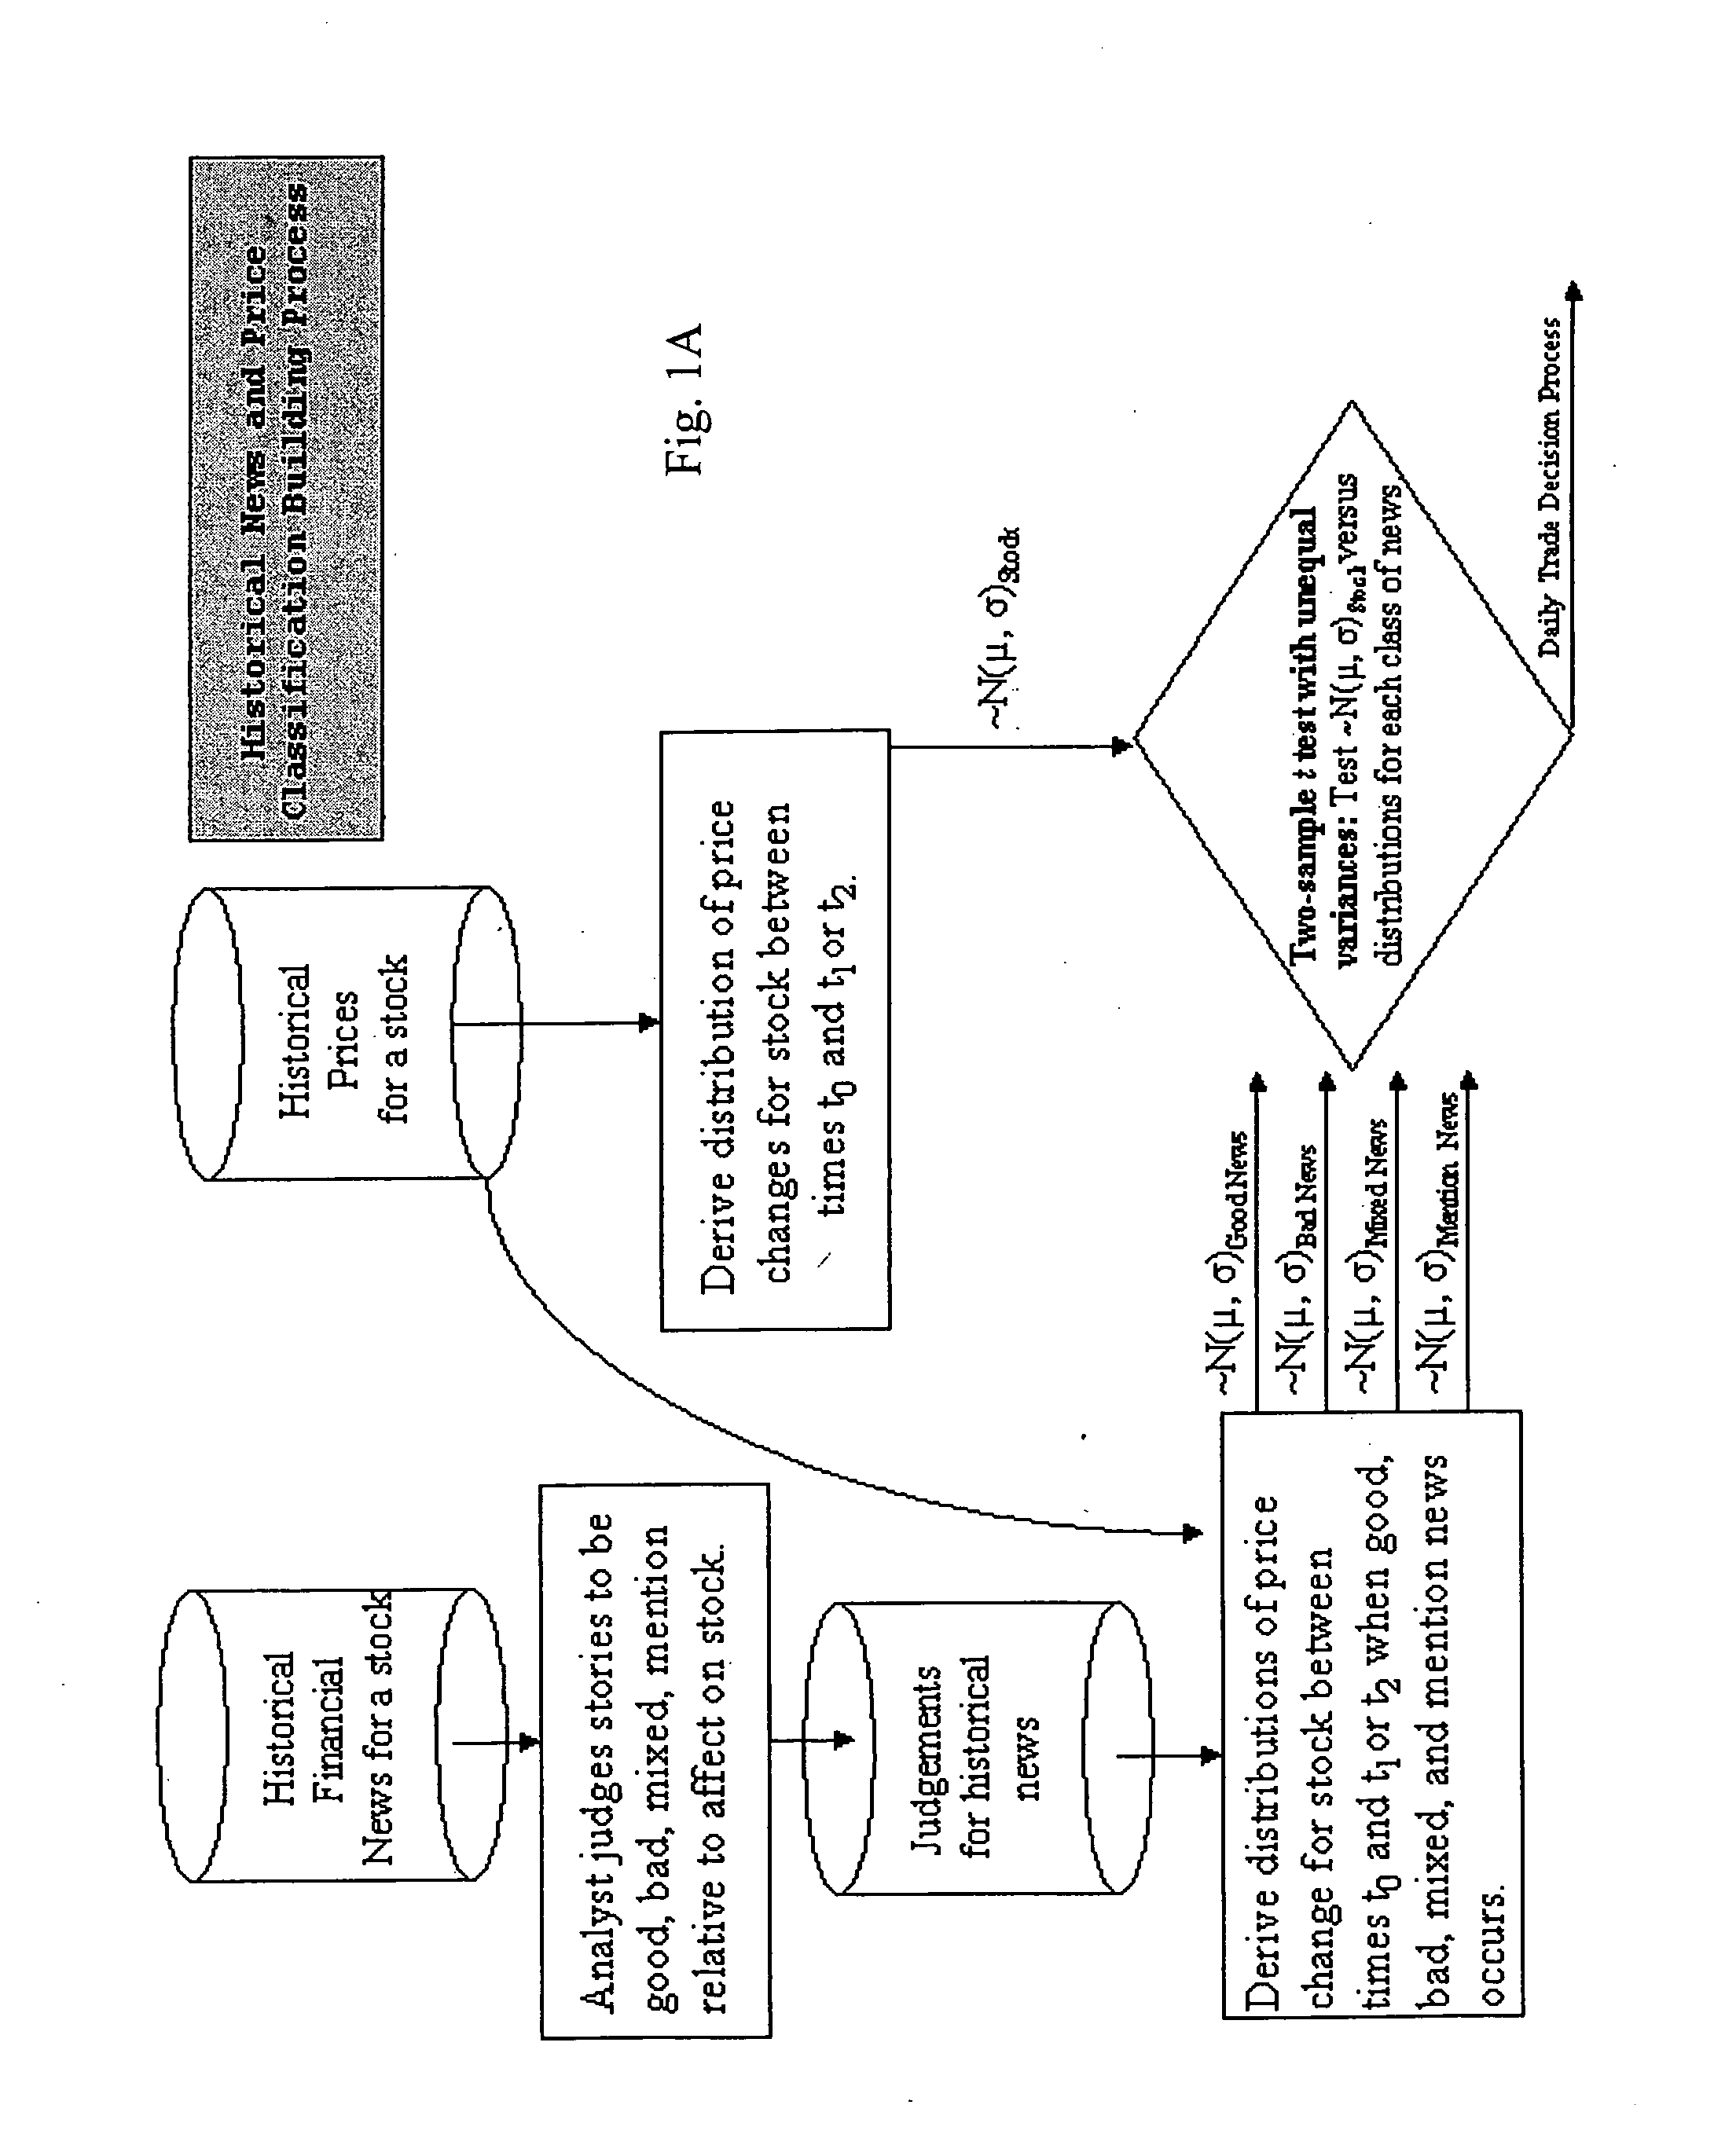 System and method for predicting security price movements using financial news